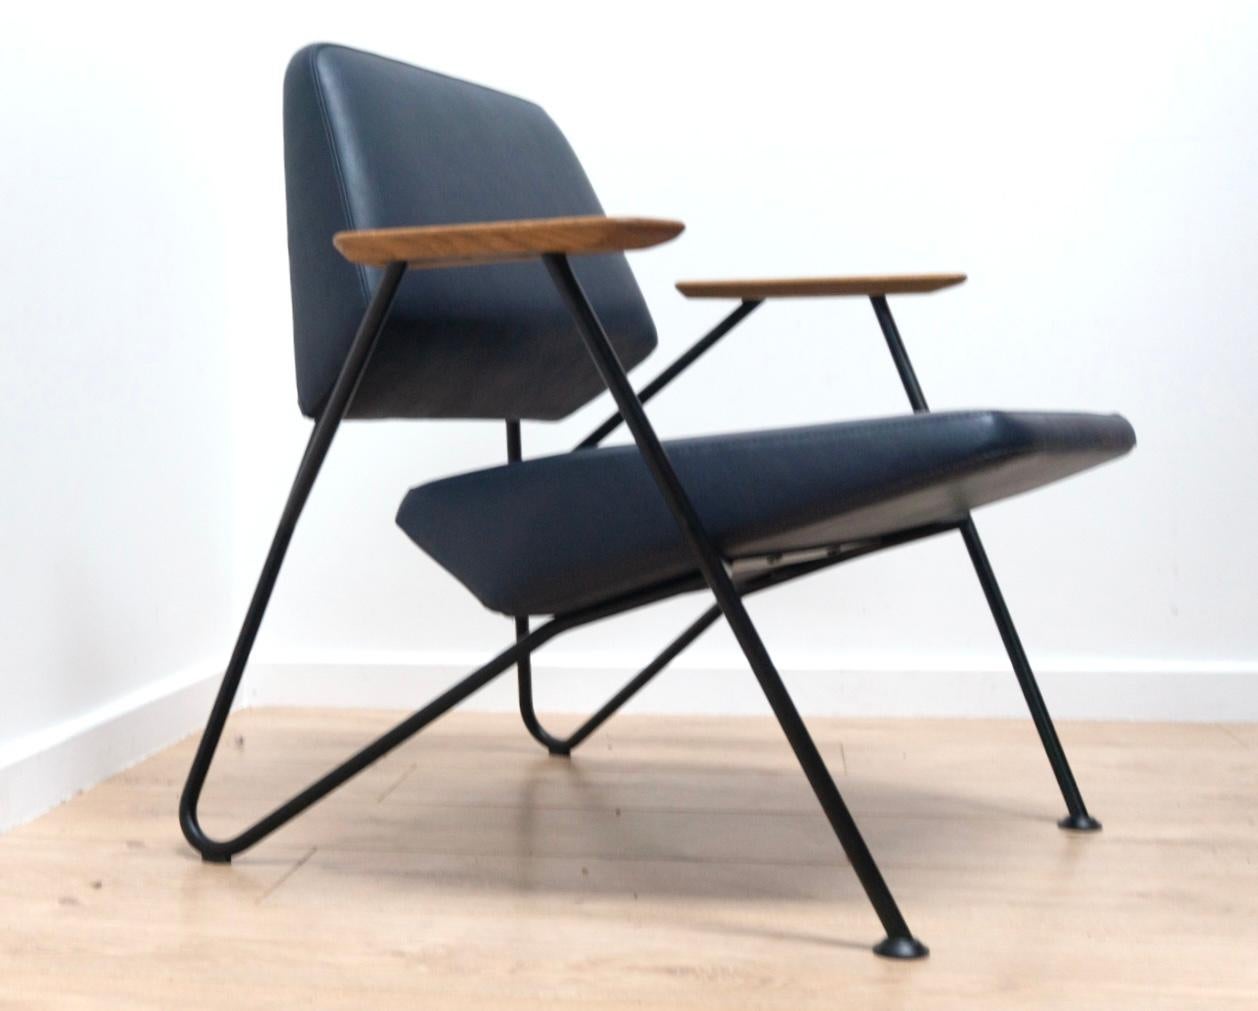 Original Modernist Leather Polygon Armchair by Prostoria For Sale 6